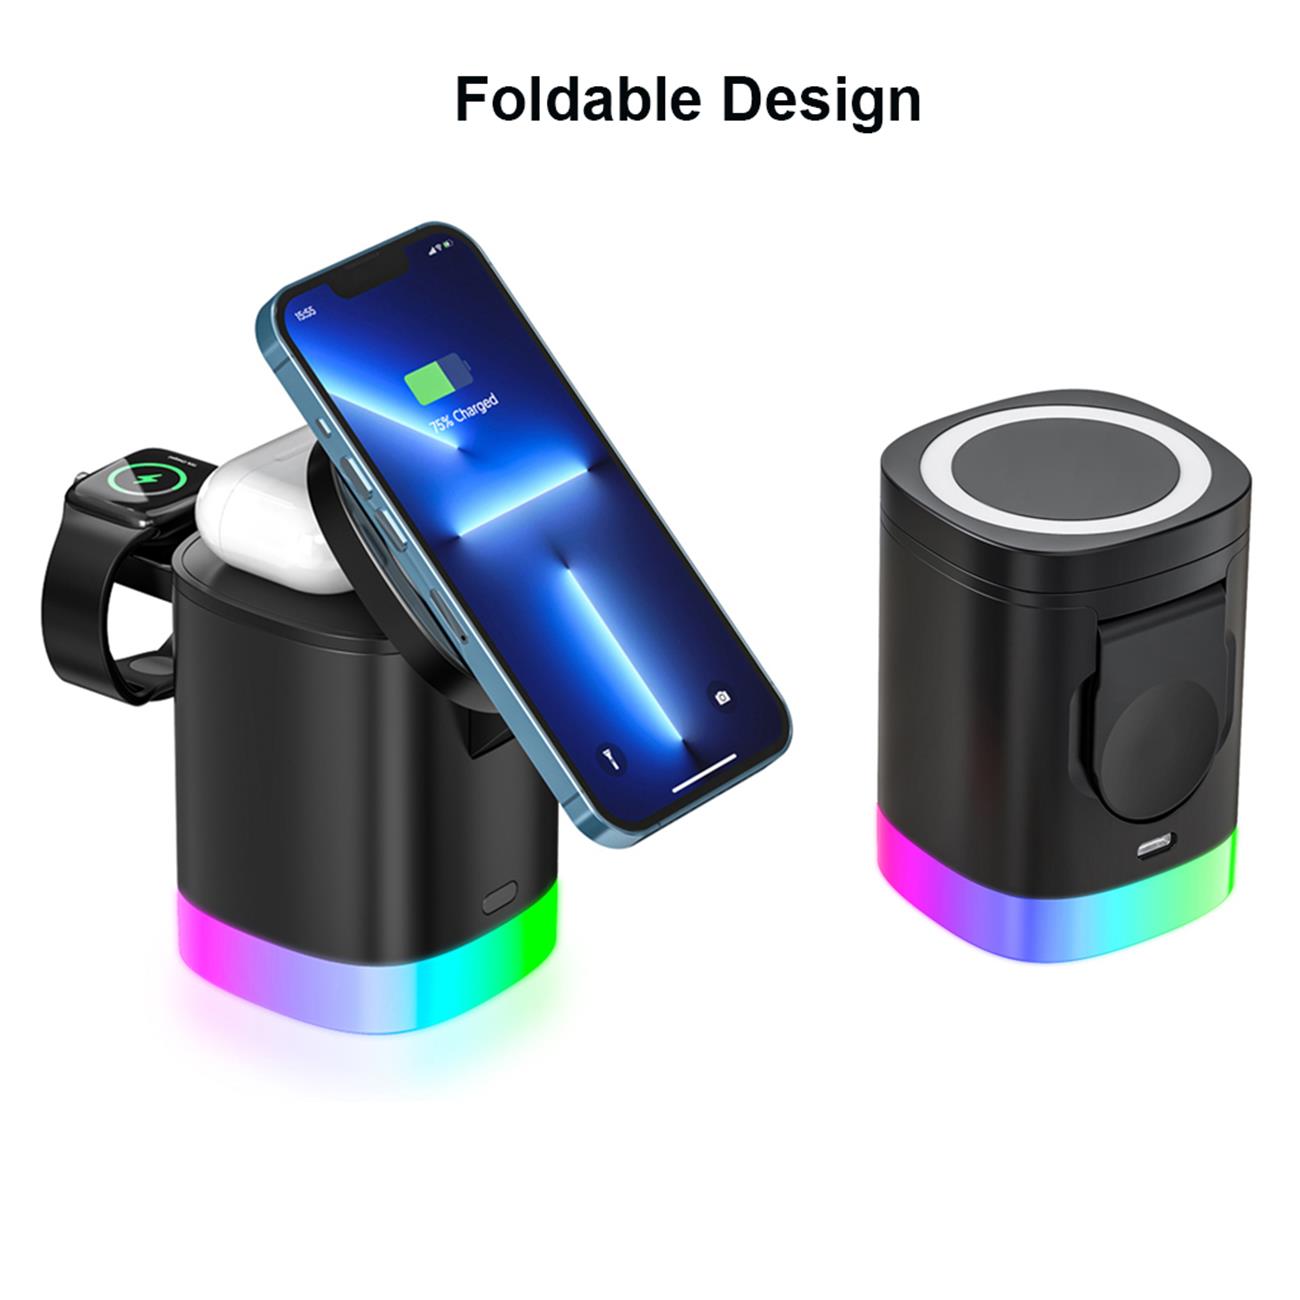 Magnetic Wireless Charger Foldable 4 In 1 Multifunction For Apple And Samsung Phone Watch Earpod